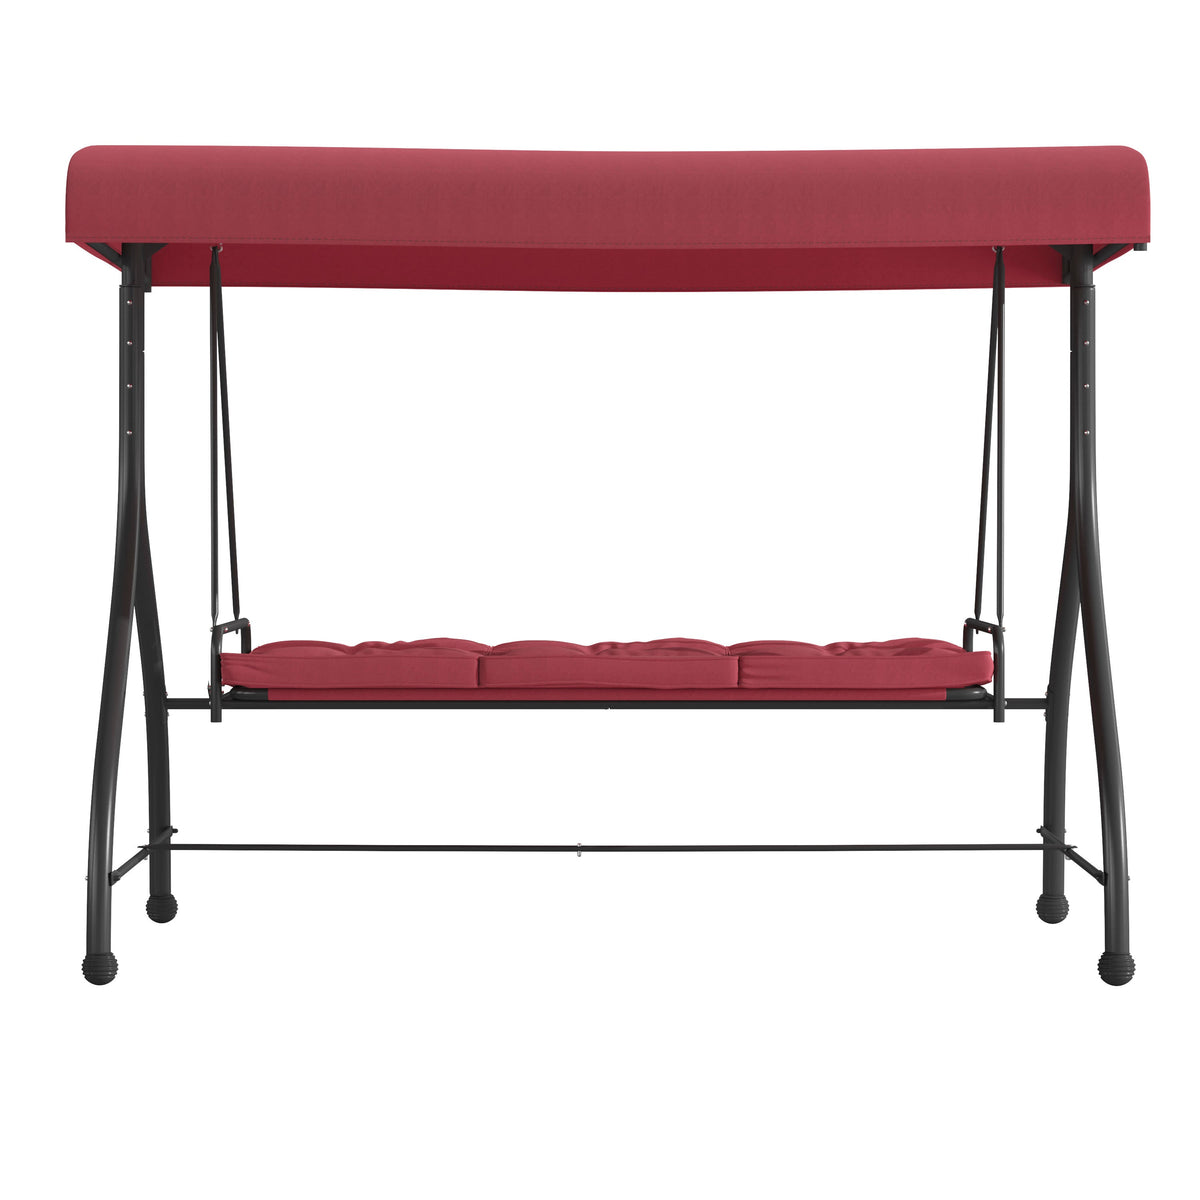 Maroon |#| 3-Seat Outdoor Steel Converting Patio Swing and Bed Canopy Hammock in Maroon